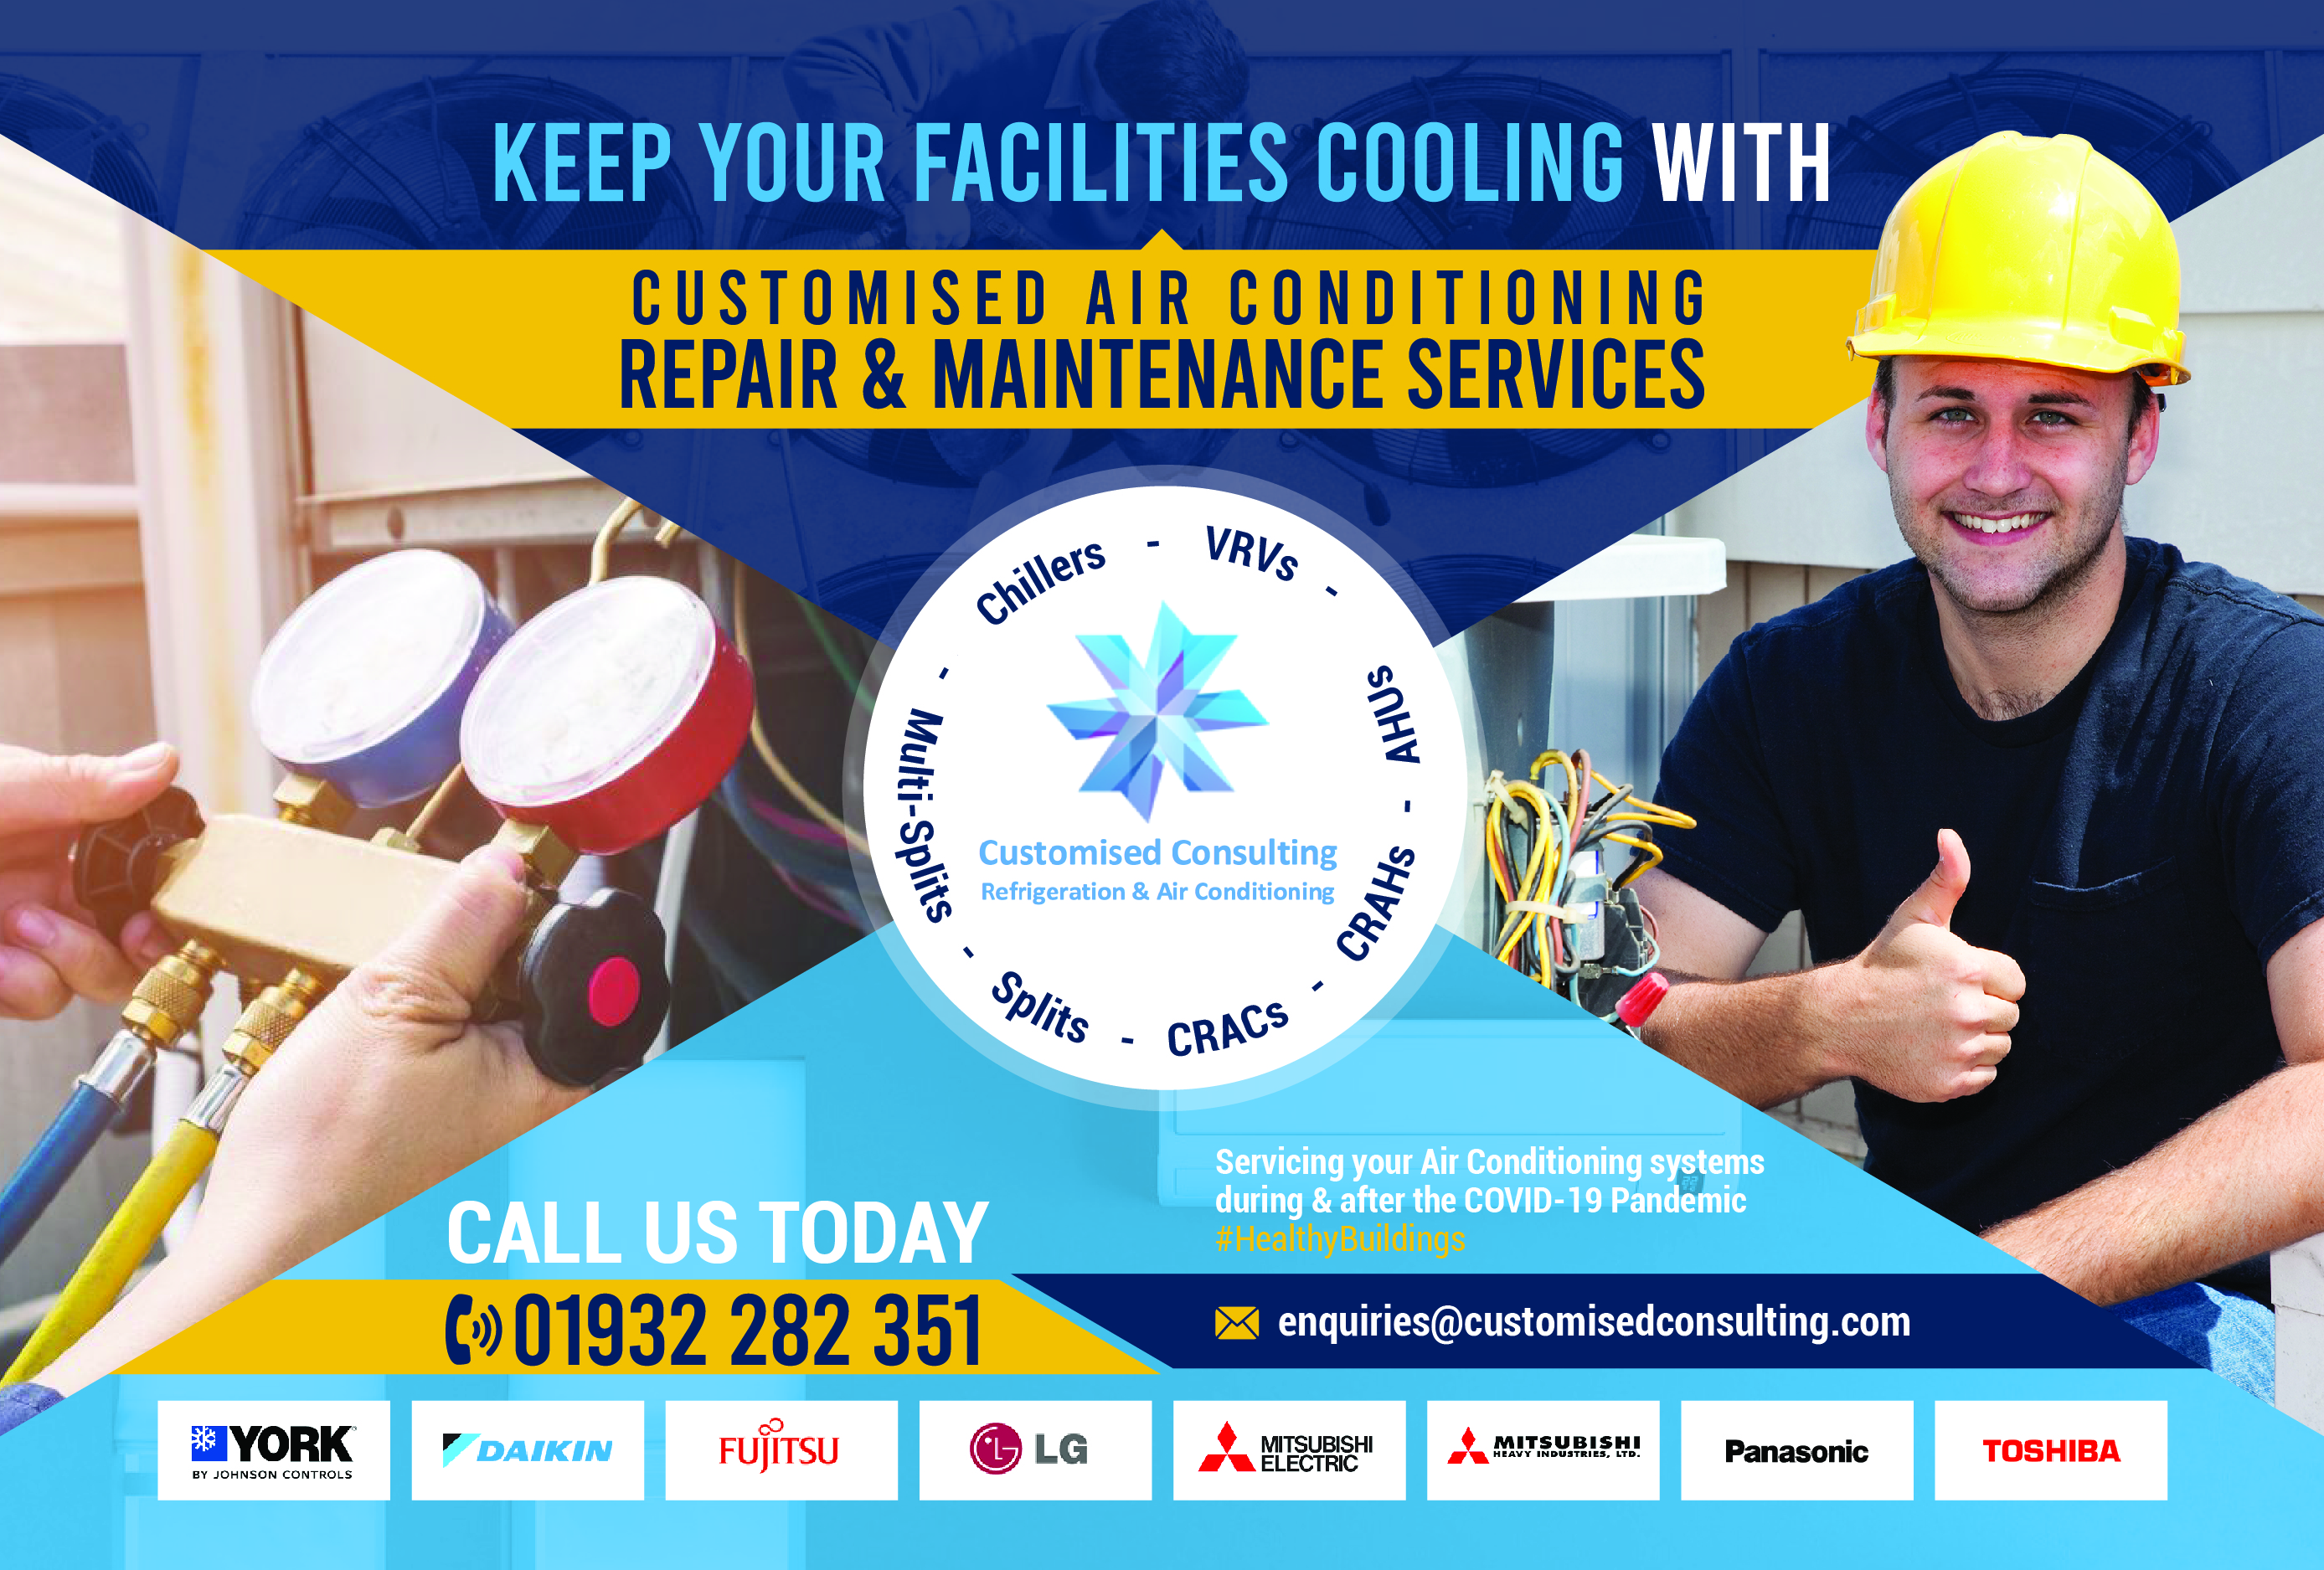 Keep your Facilities Cooling with Customised Air Conditioning Repair & Maintenance Services